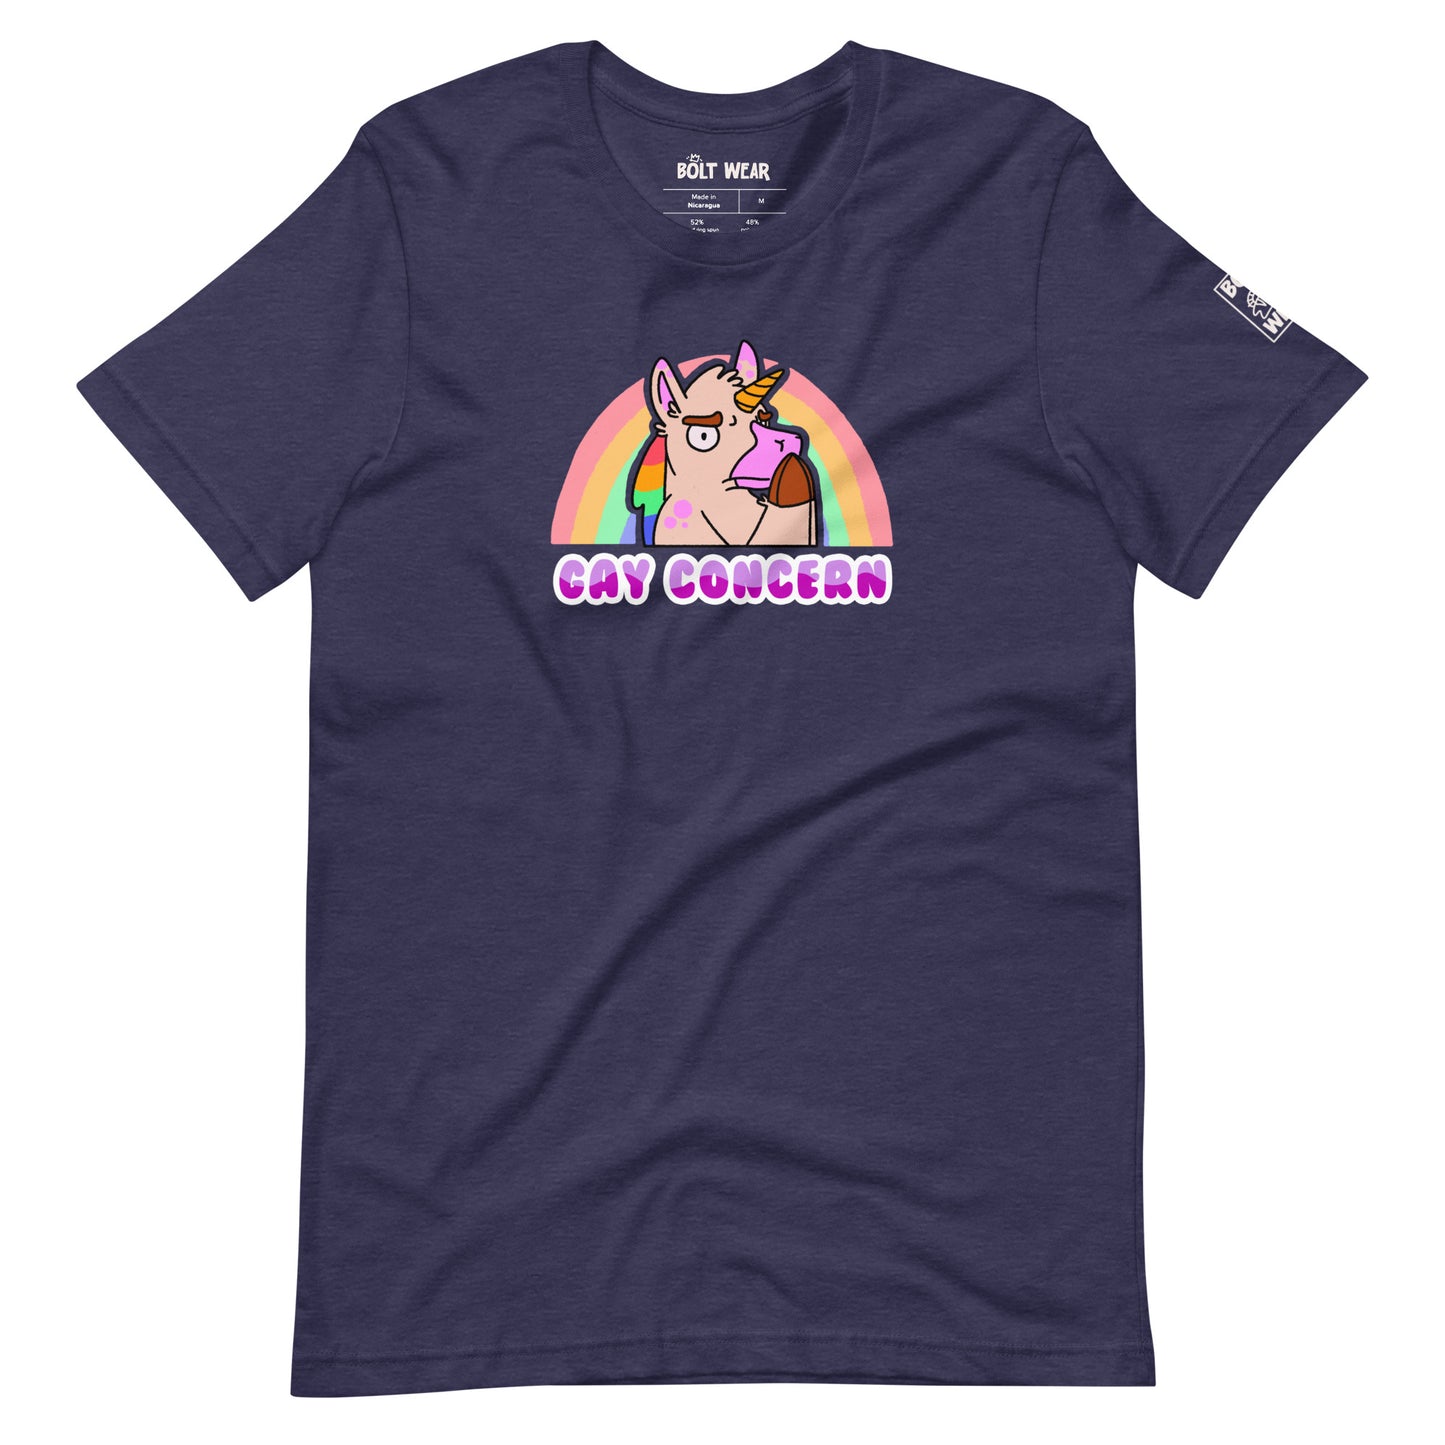 Heather Midnight Navy Gay Concern t-shirt featuring unicorn in concerned pose with rainbow behind.